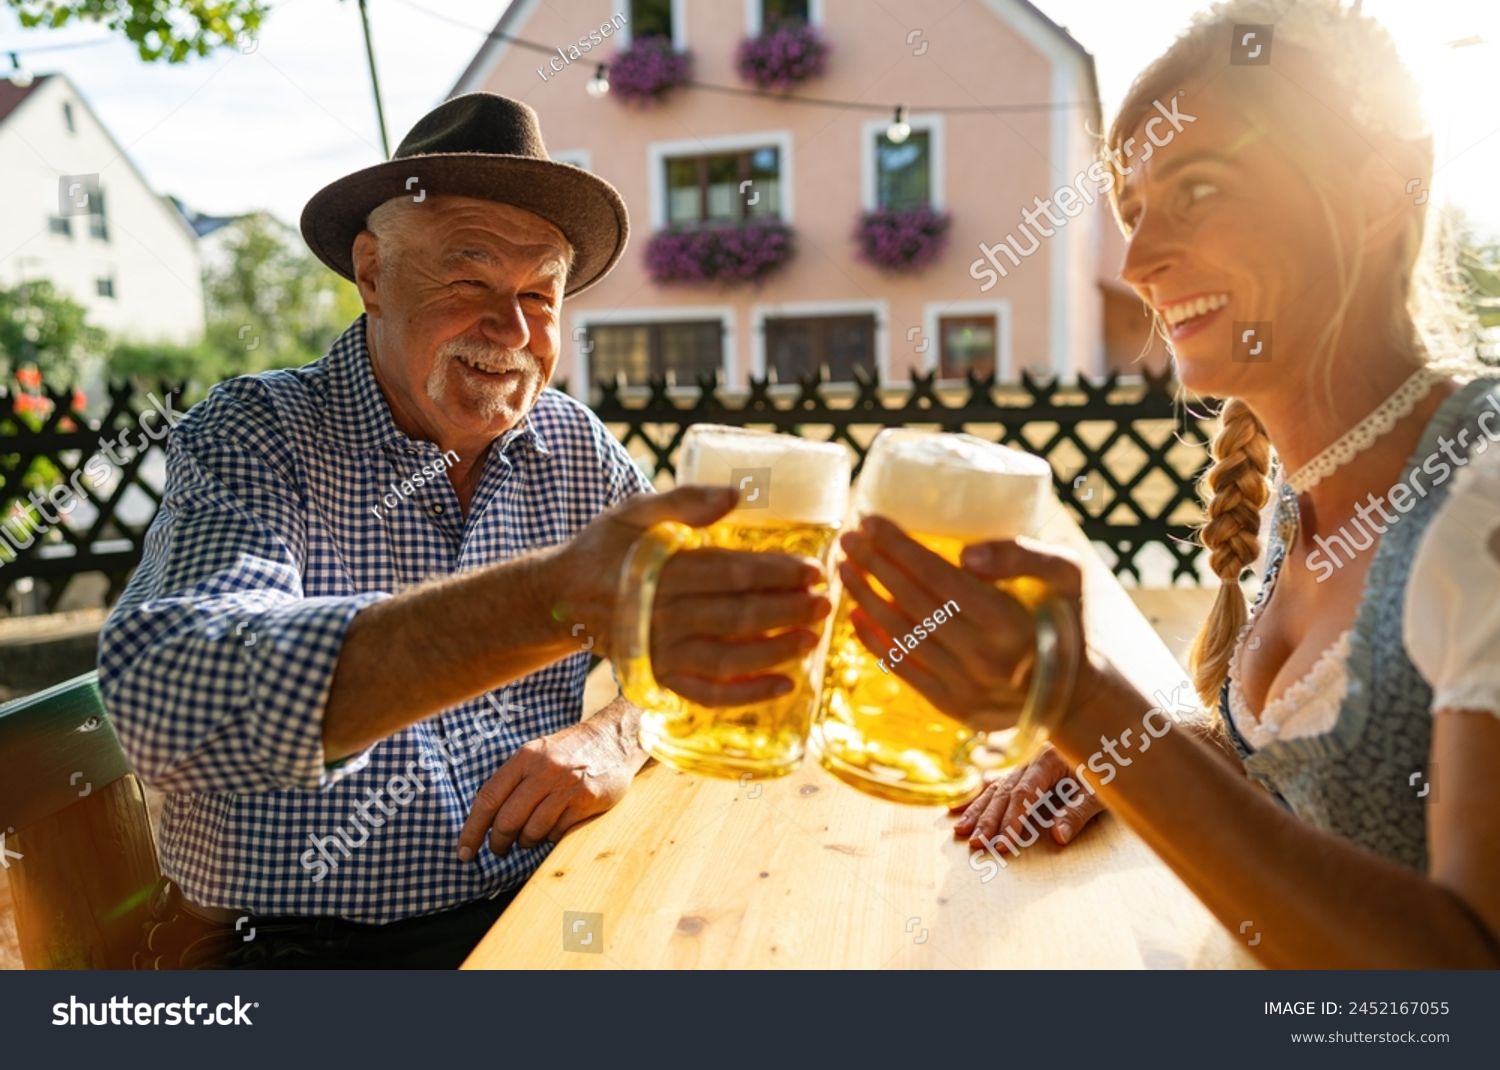 Senior man and woman in traditional clothing or tracht toasting beer mugs in beer garden or oktoberfest at Bavaria, Germany #2452167055